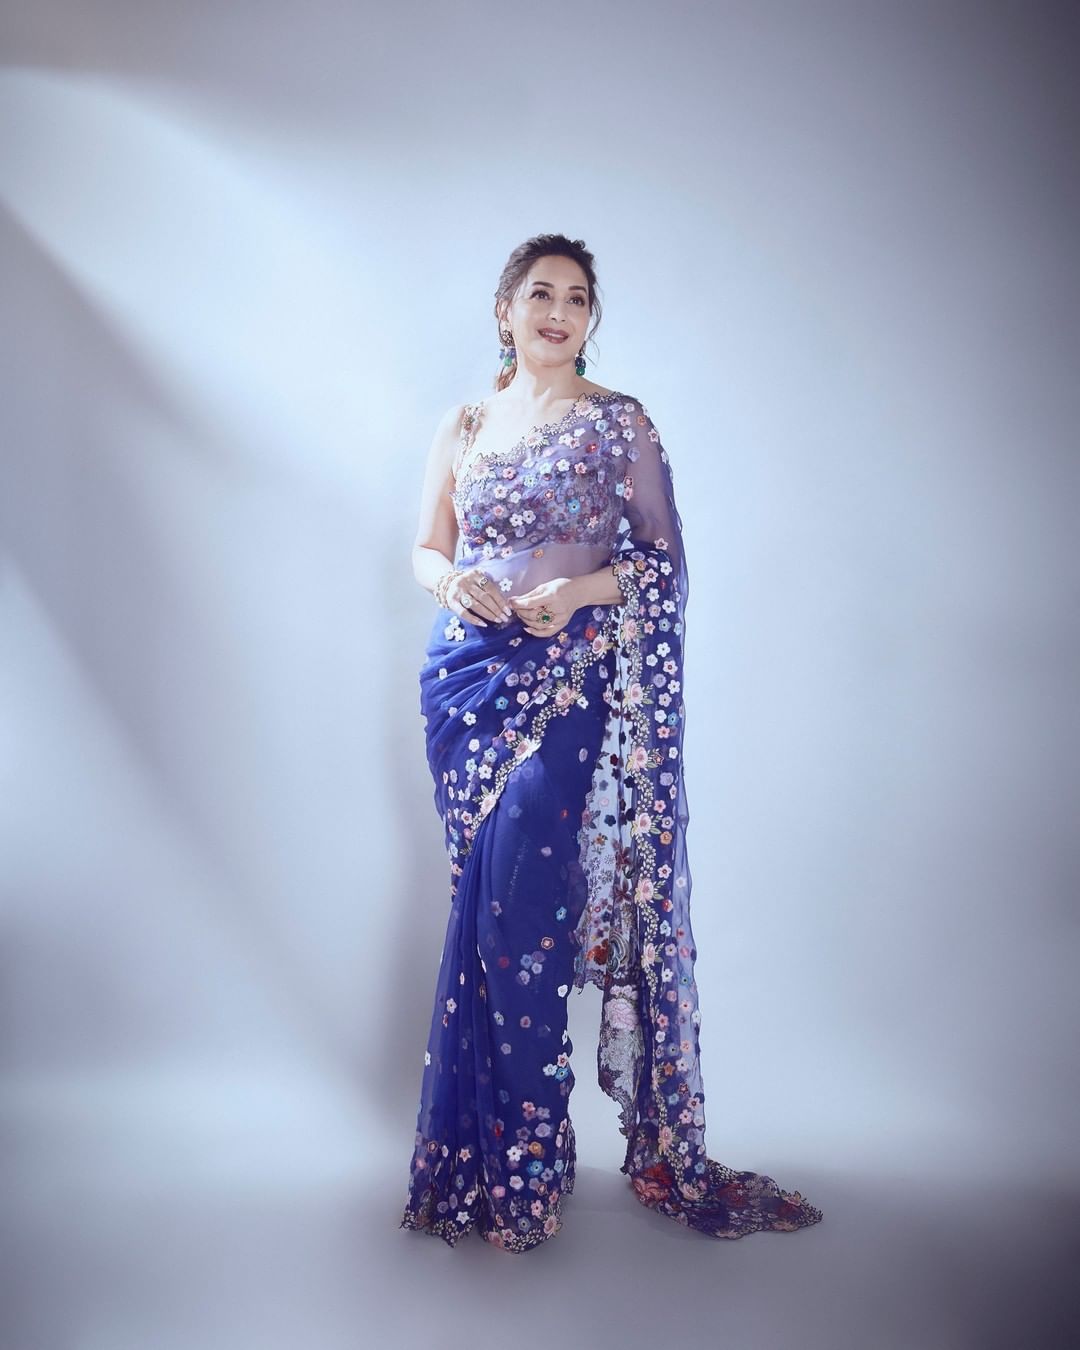 Madhuri Dixit looks ethereal in a blue floral saree.